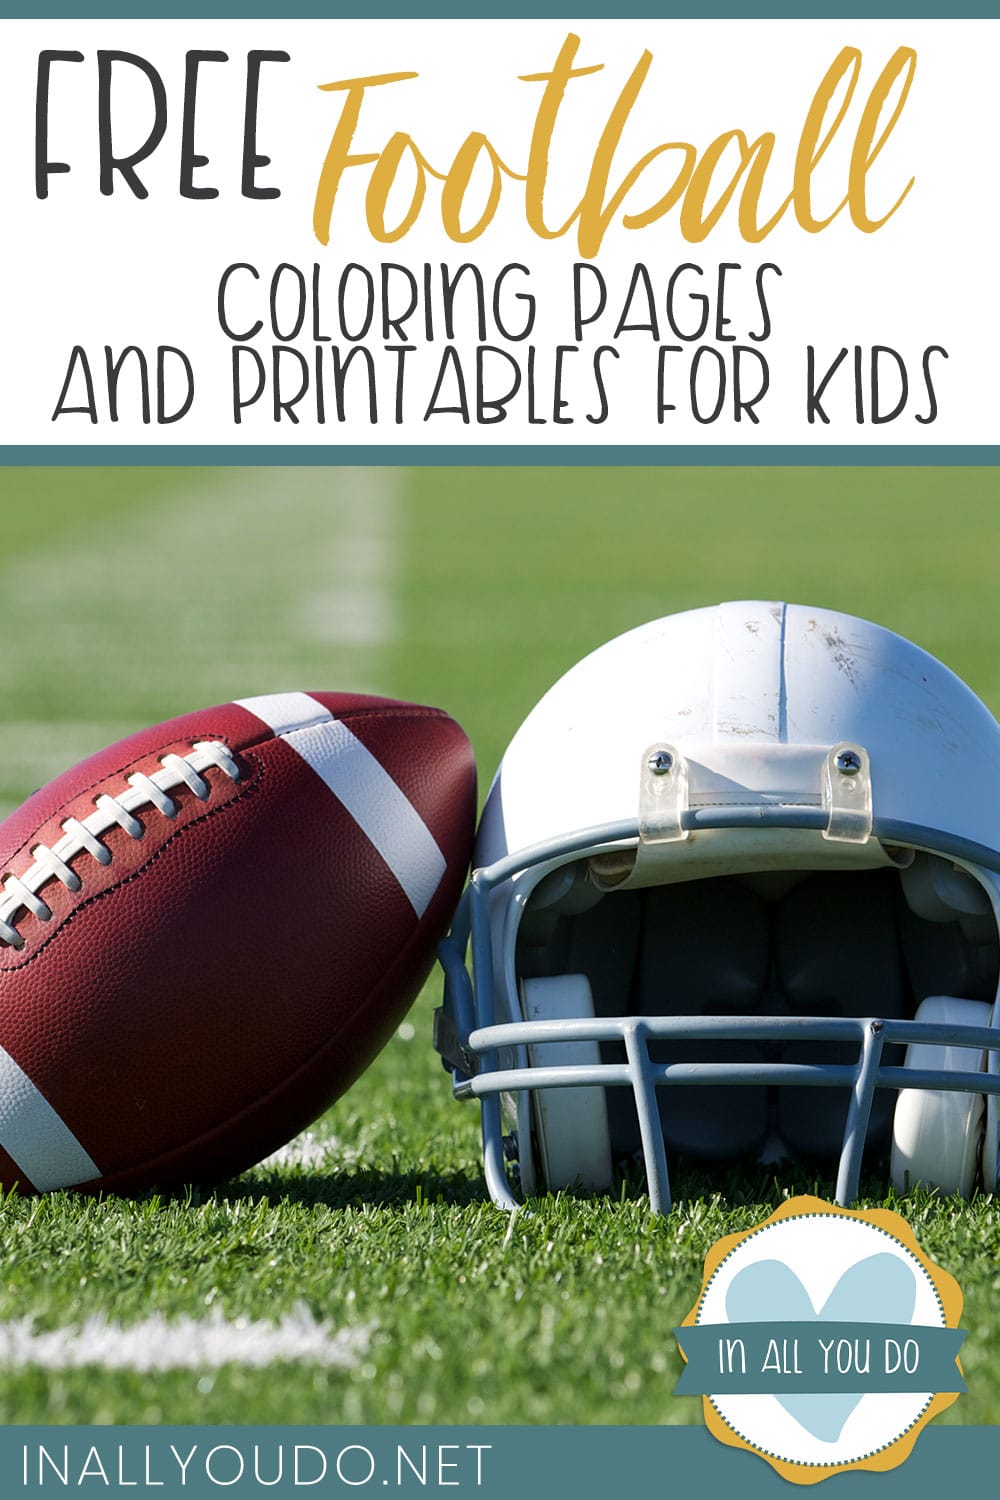 Free football coloring pages and printables for kids â in all you do